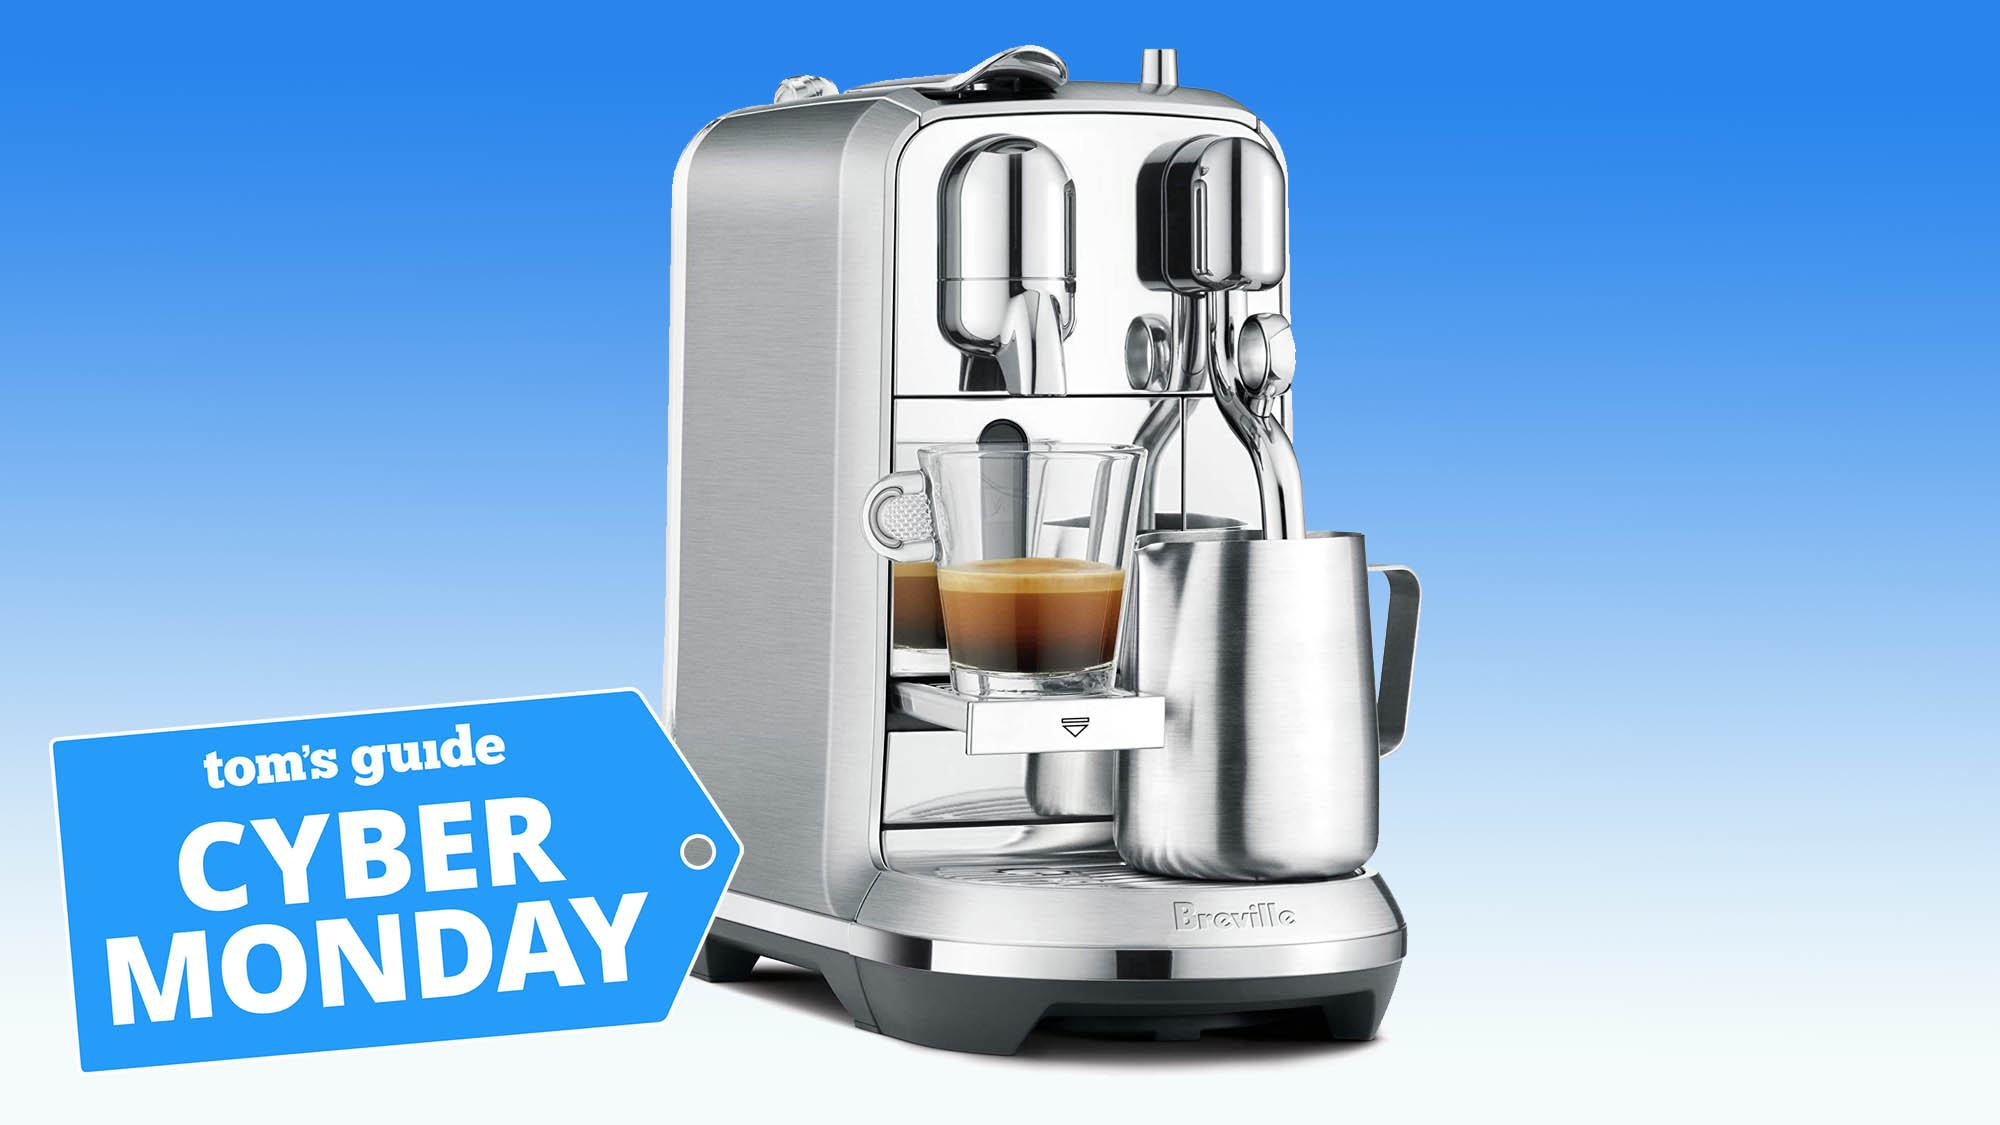 Cyber Monday Coffee deals: Here are the best deals for coffee lovers